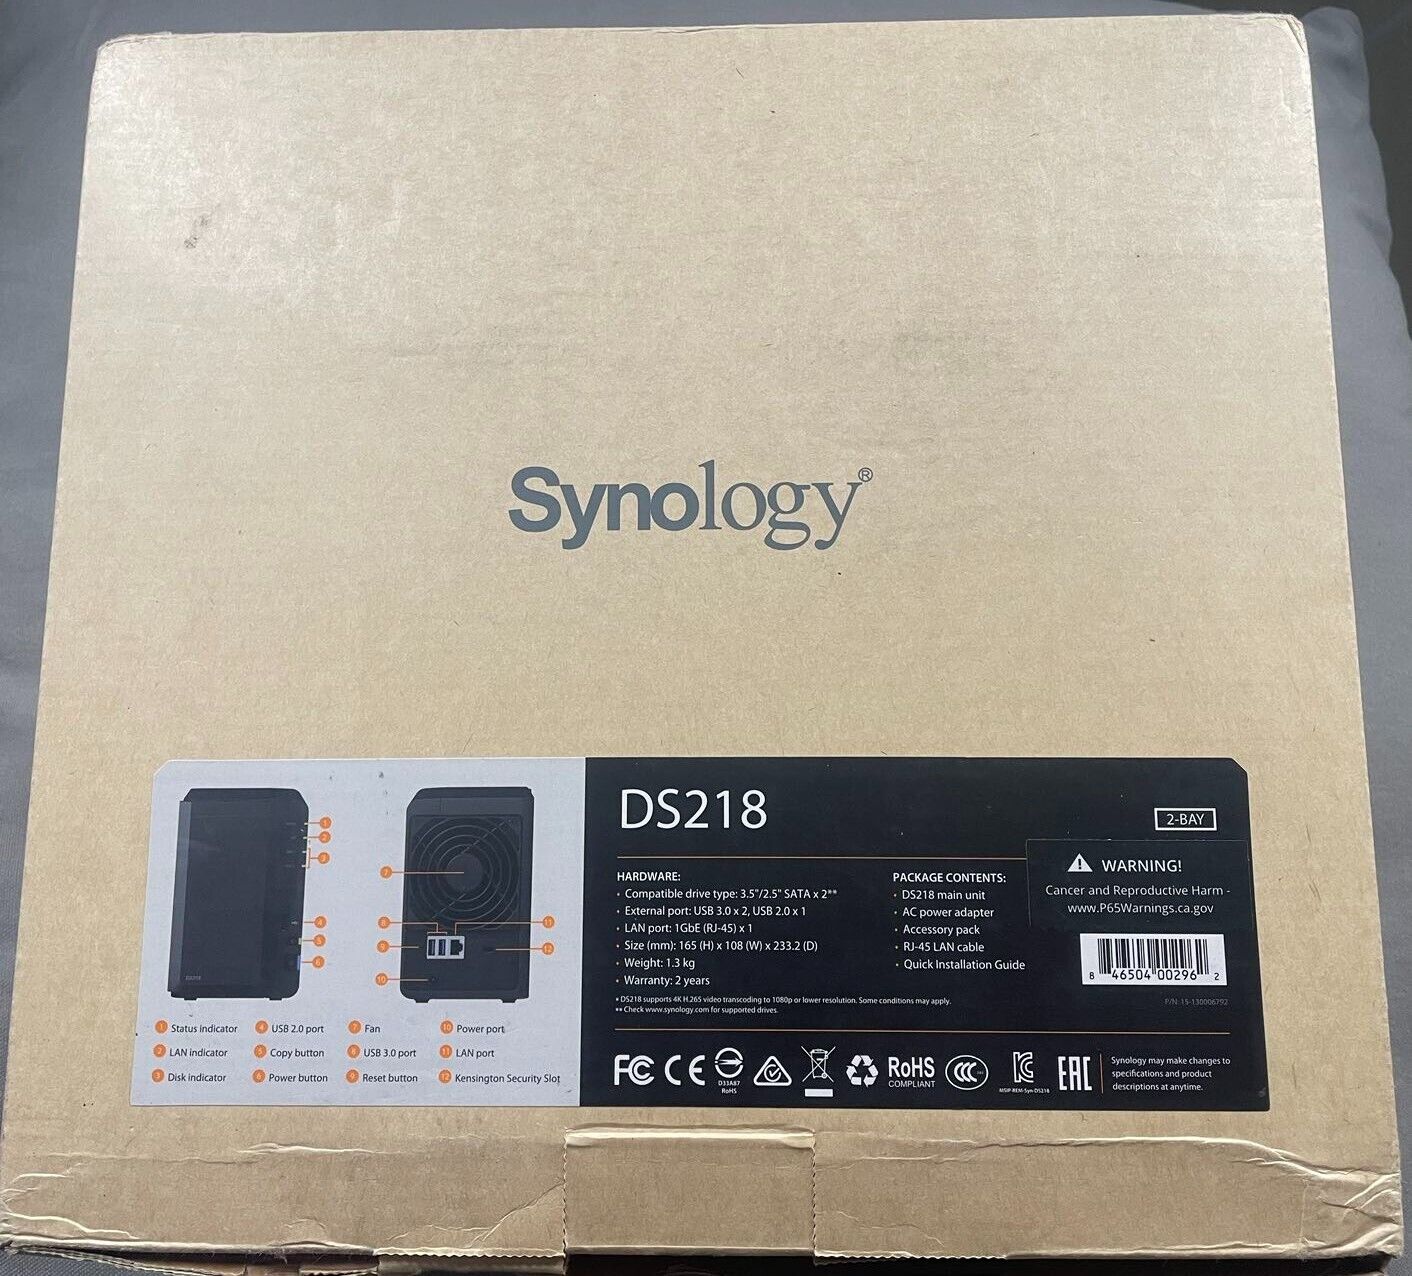 Synology DiskStation DS218 2-bay NAS - Over 20TB raw capacity, 64-bit quad-core